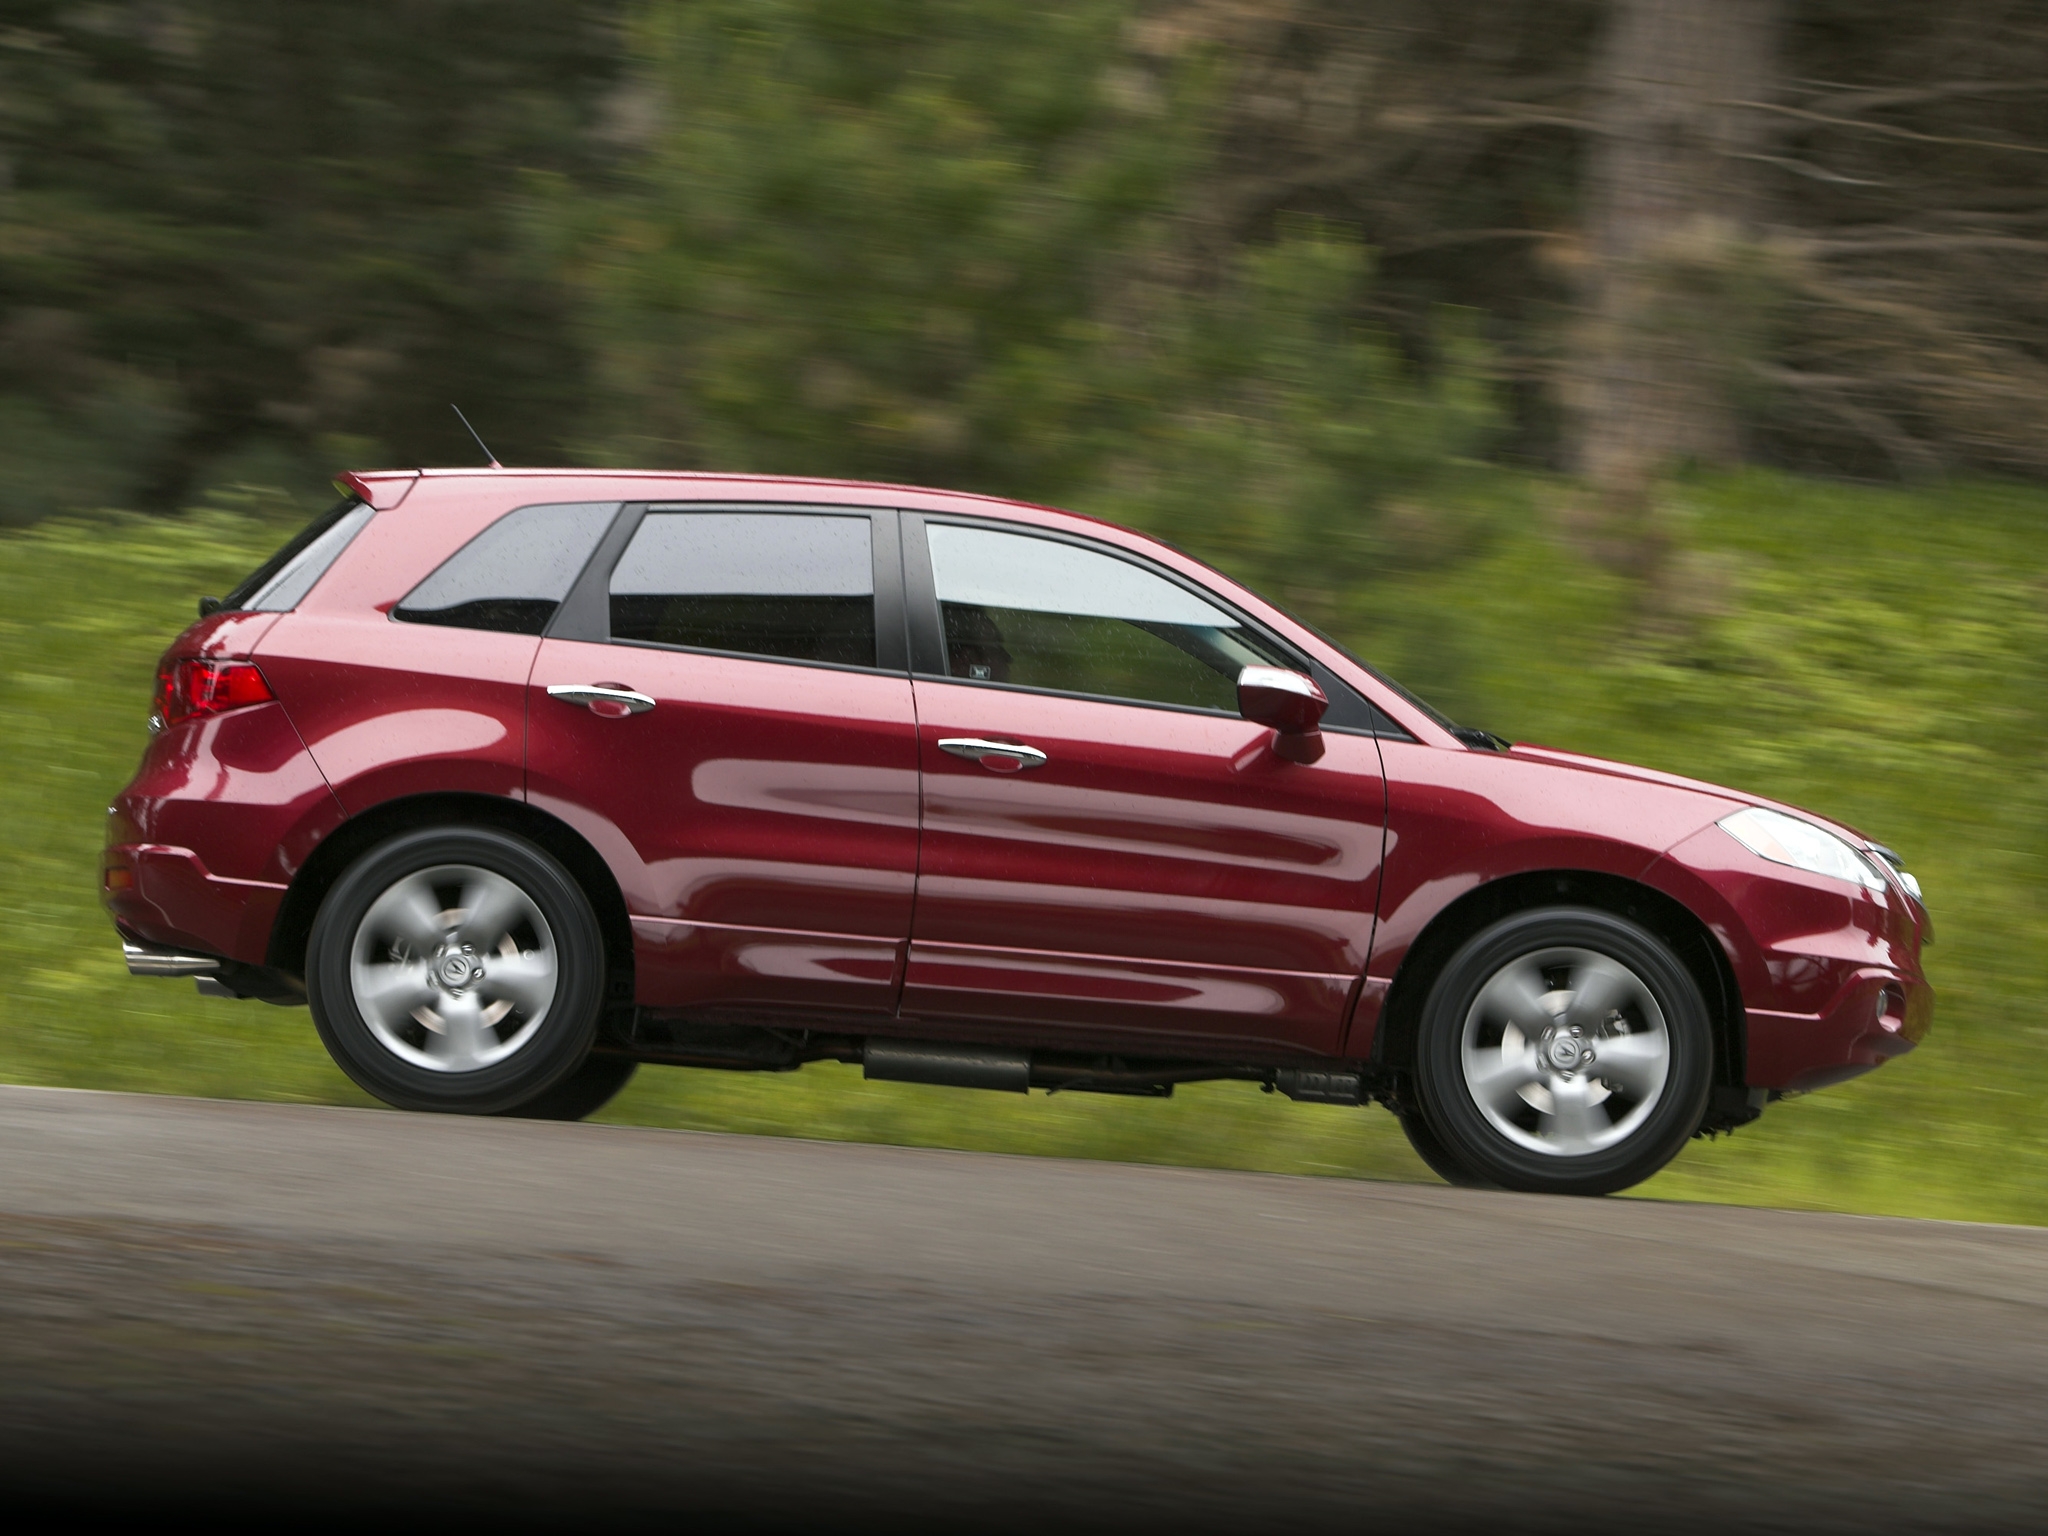 speed, auto, nature, acura, cars, red, jeep, side view, akura, rdx